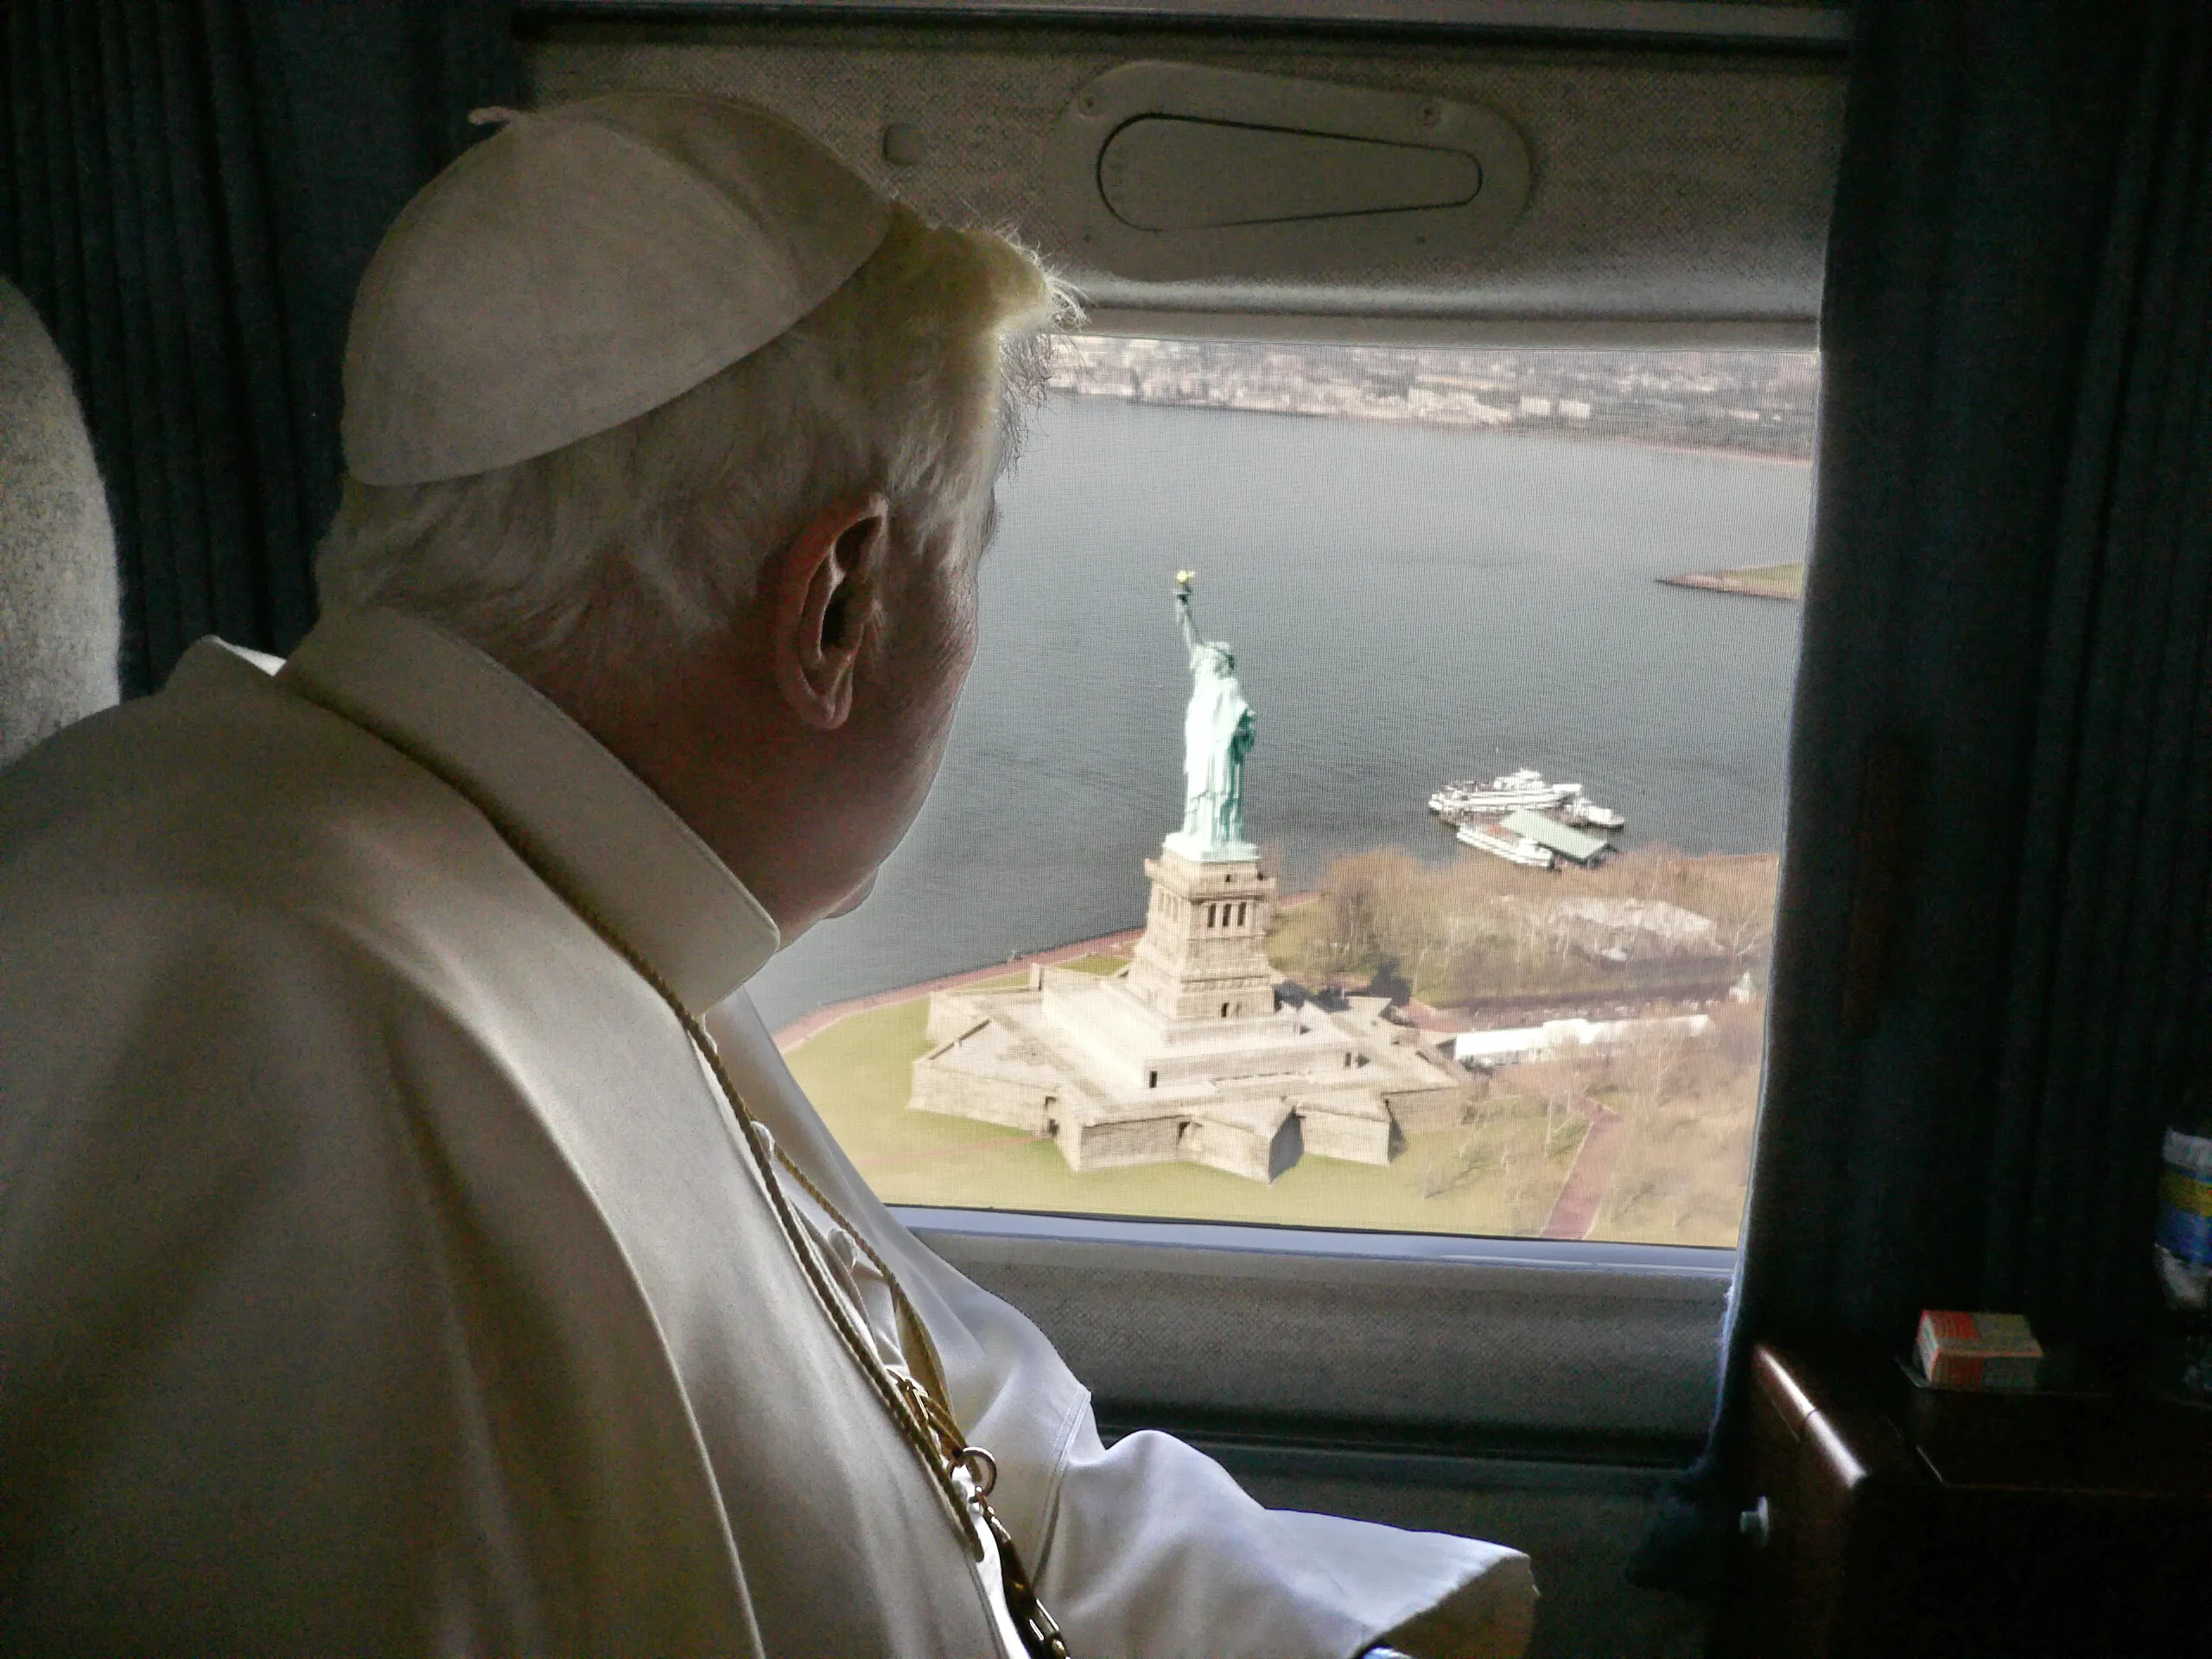 Pope Benedict XVI sees the Statue of Liberty from the air during his only visit to the United States April 15–20, 2008.?w=200&h=150